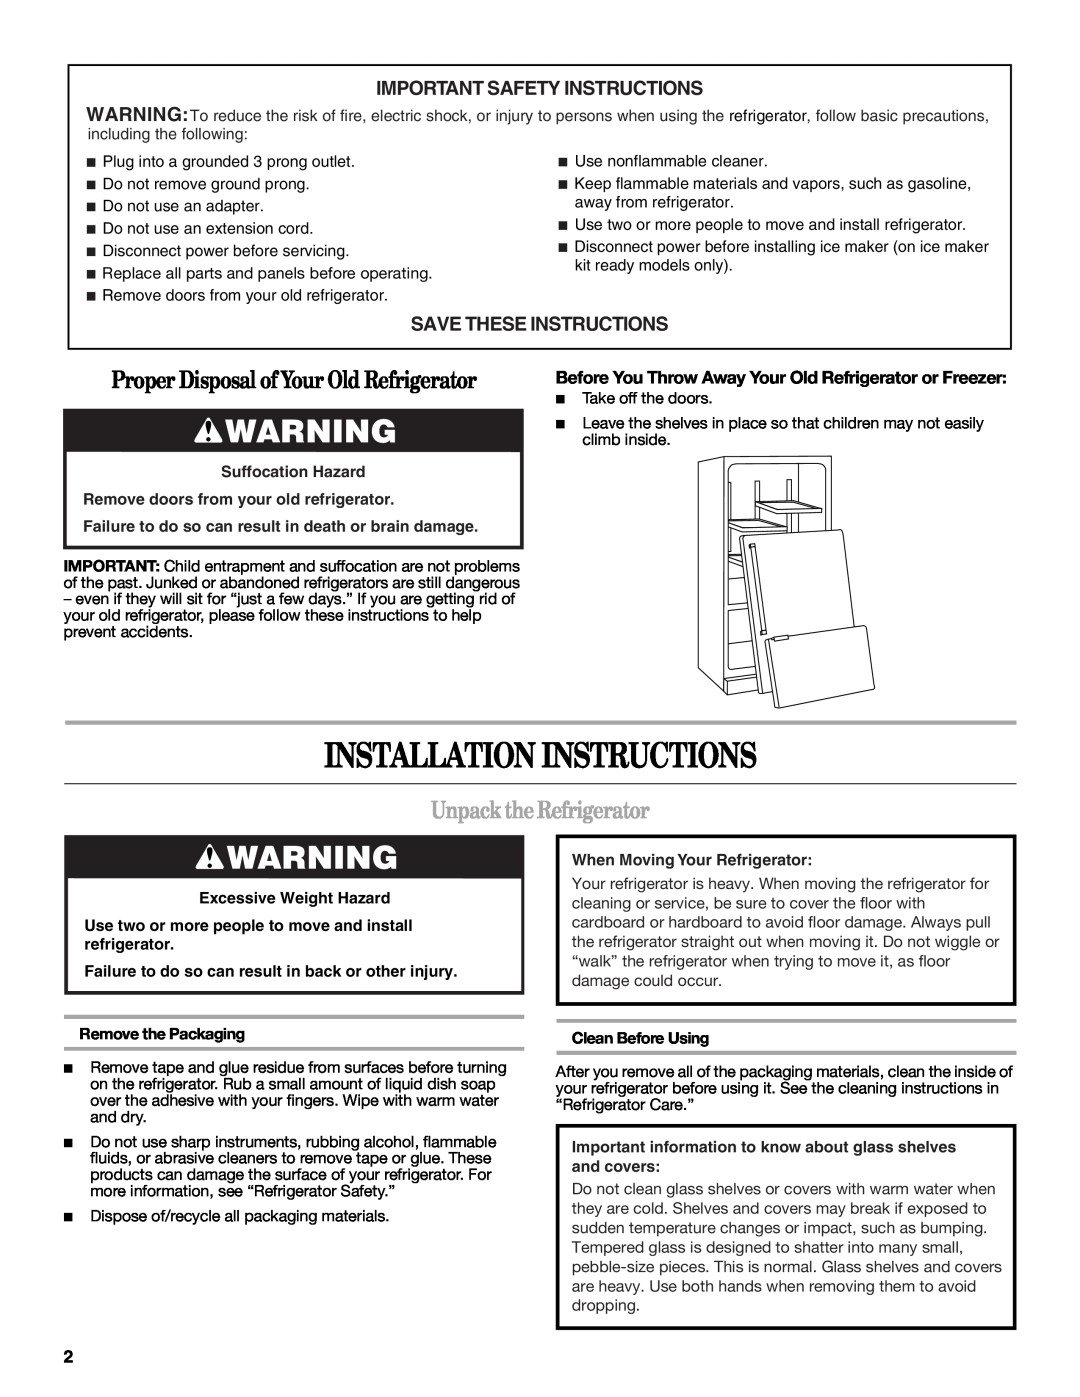 Whirlpool W10208432A Installation Instructions, Unpack the Refrigerator, Important Safety Instructions, Clean Before Using 